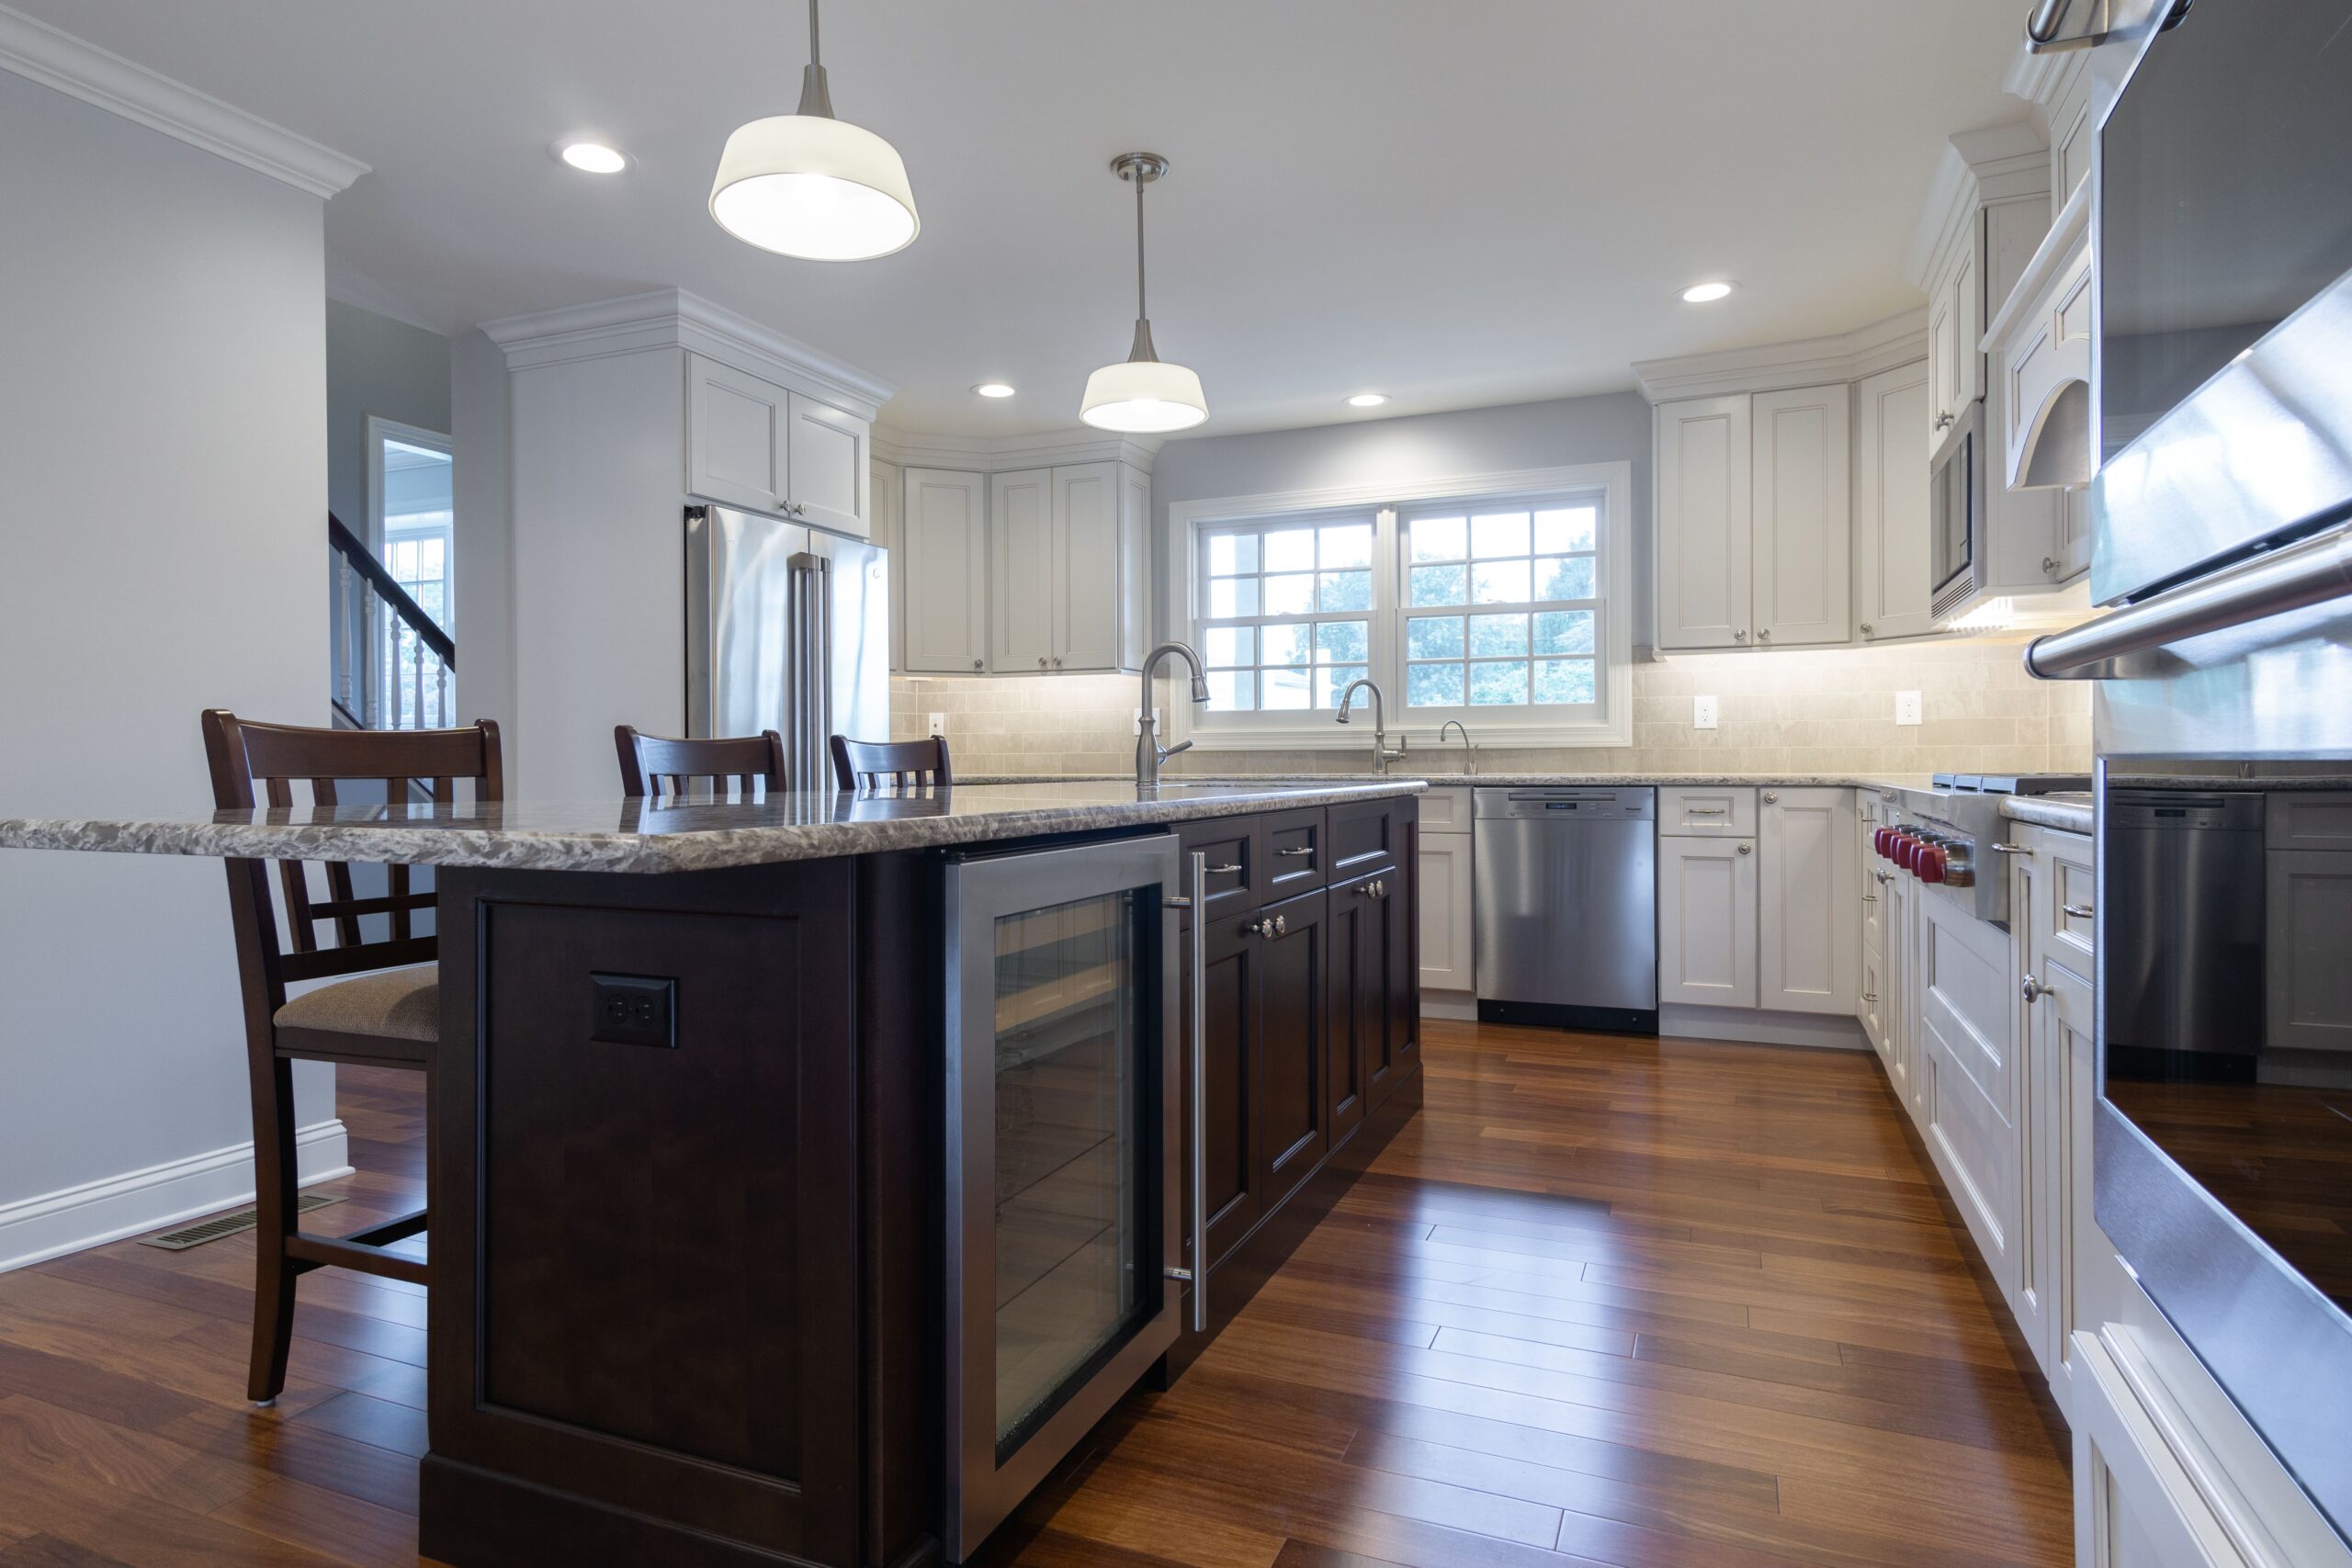 Renovated kitchen with white cabinets and center island from amiano and son